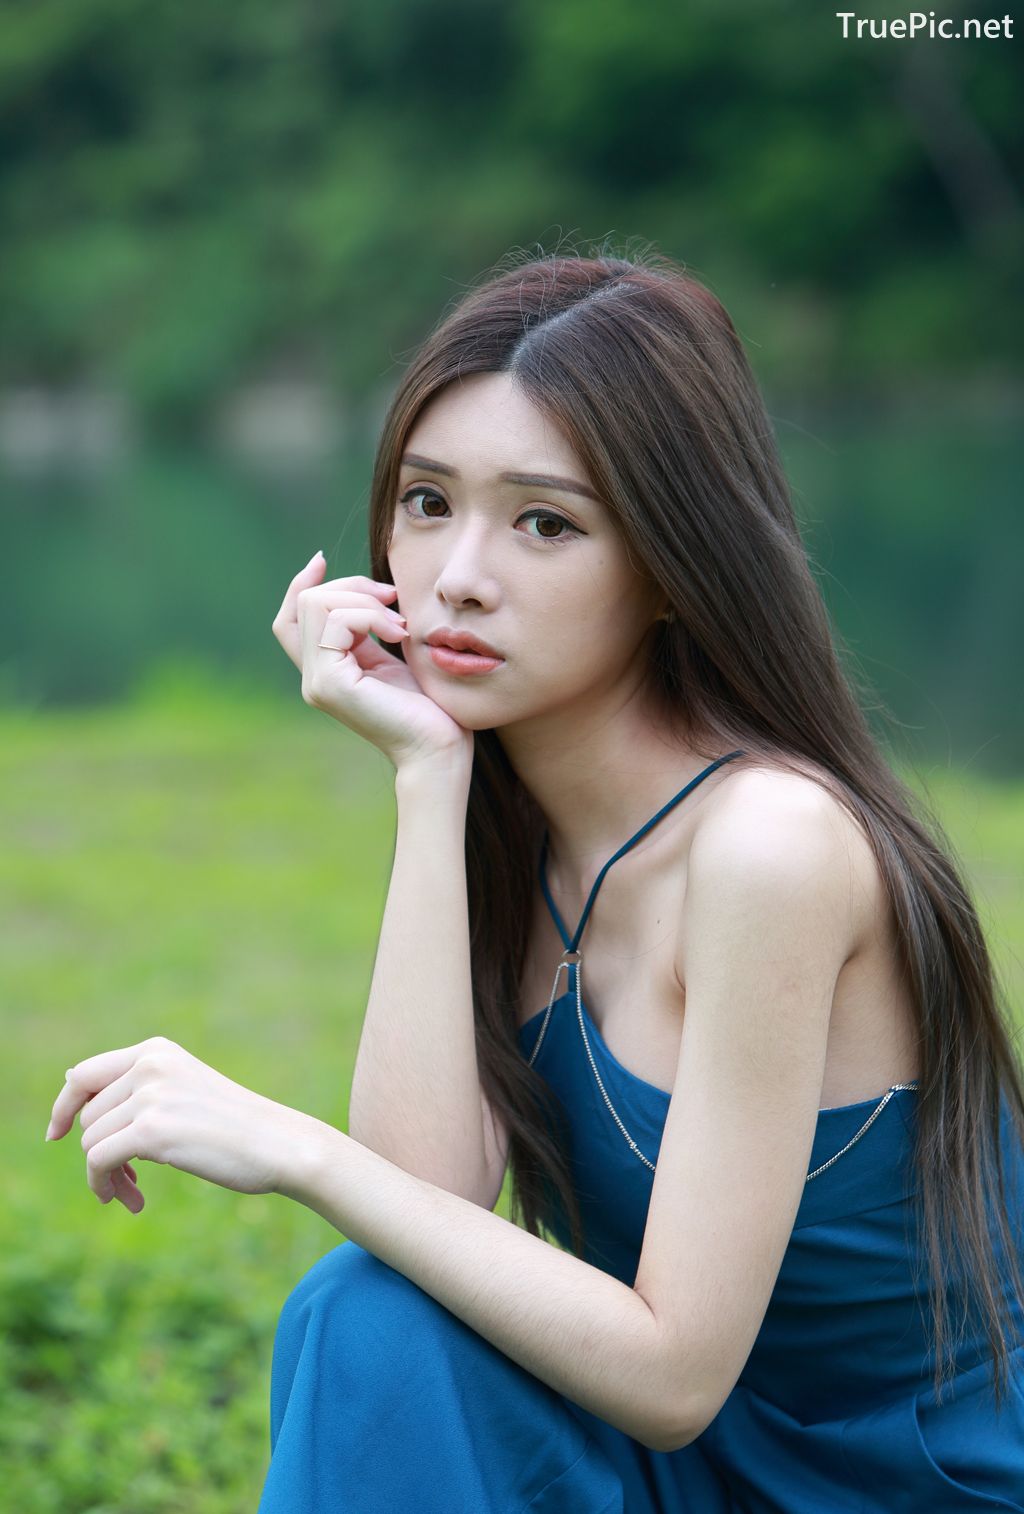 Image-Taiwanese-Pure-Girl-承容-Young-Beautiful-And-Lovely-TruePic.net- Picture-38